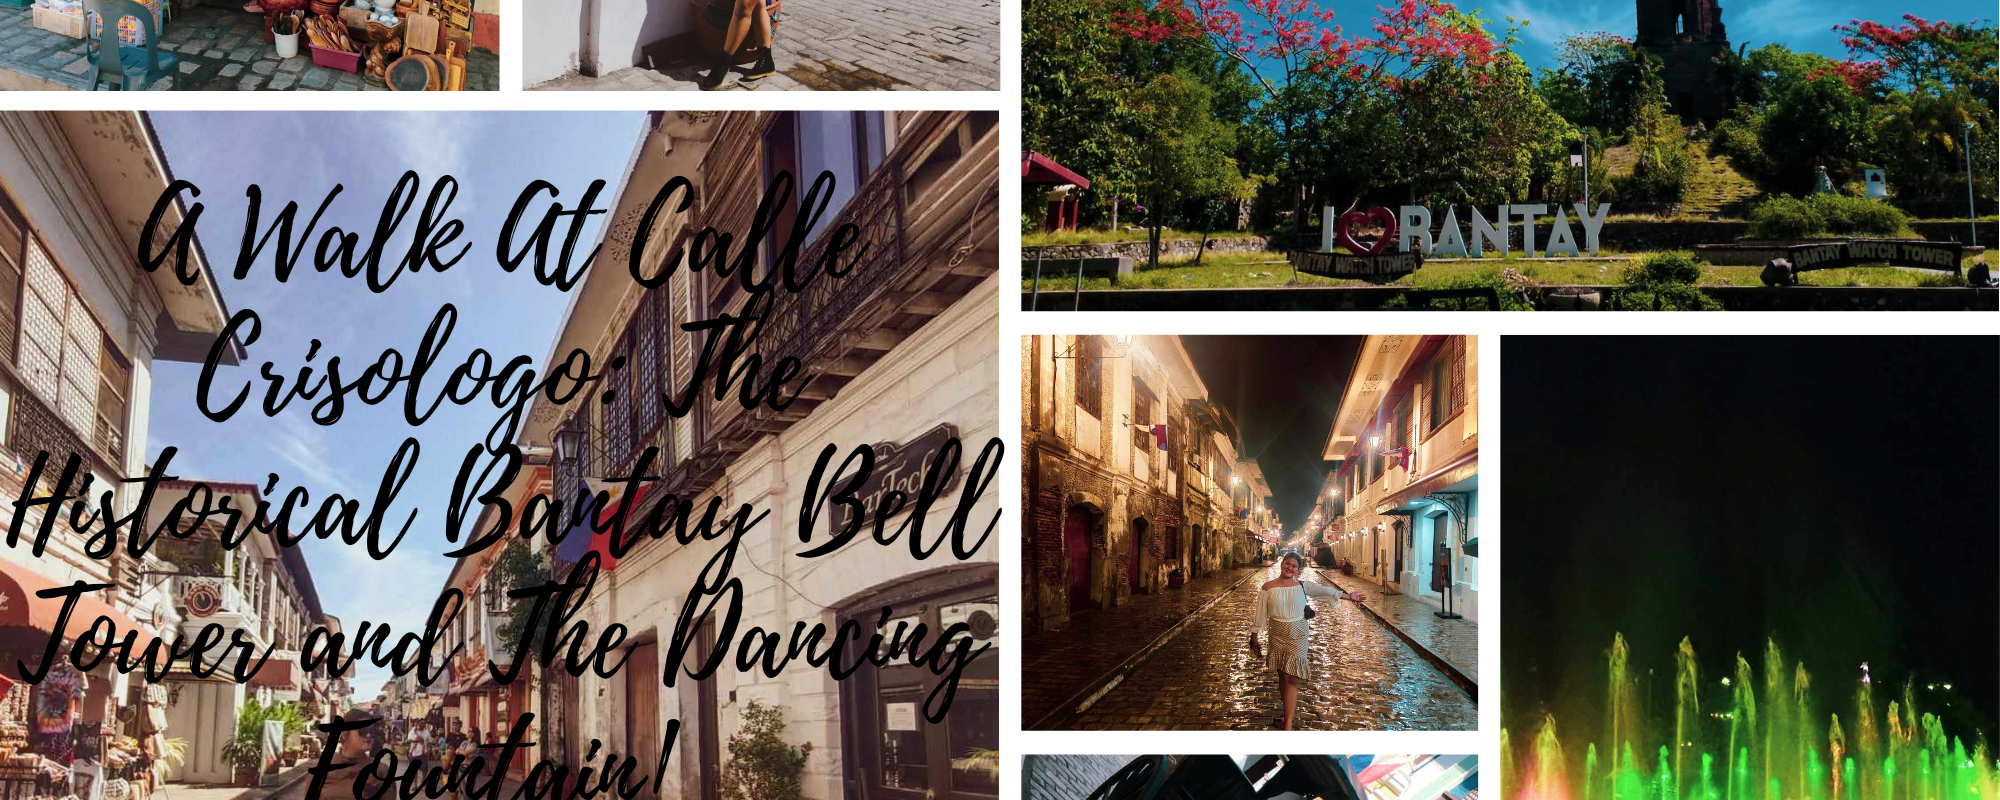 A Walk At Calle Crisologo: The Historical Bantay Bell Tower and The Dancing Fountain! 